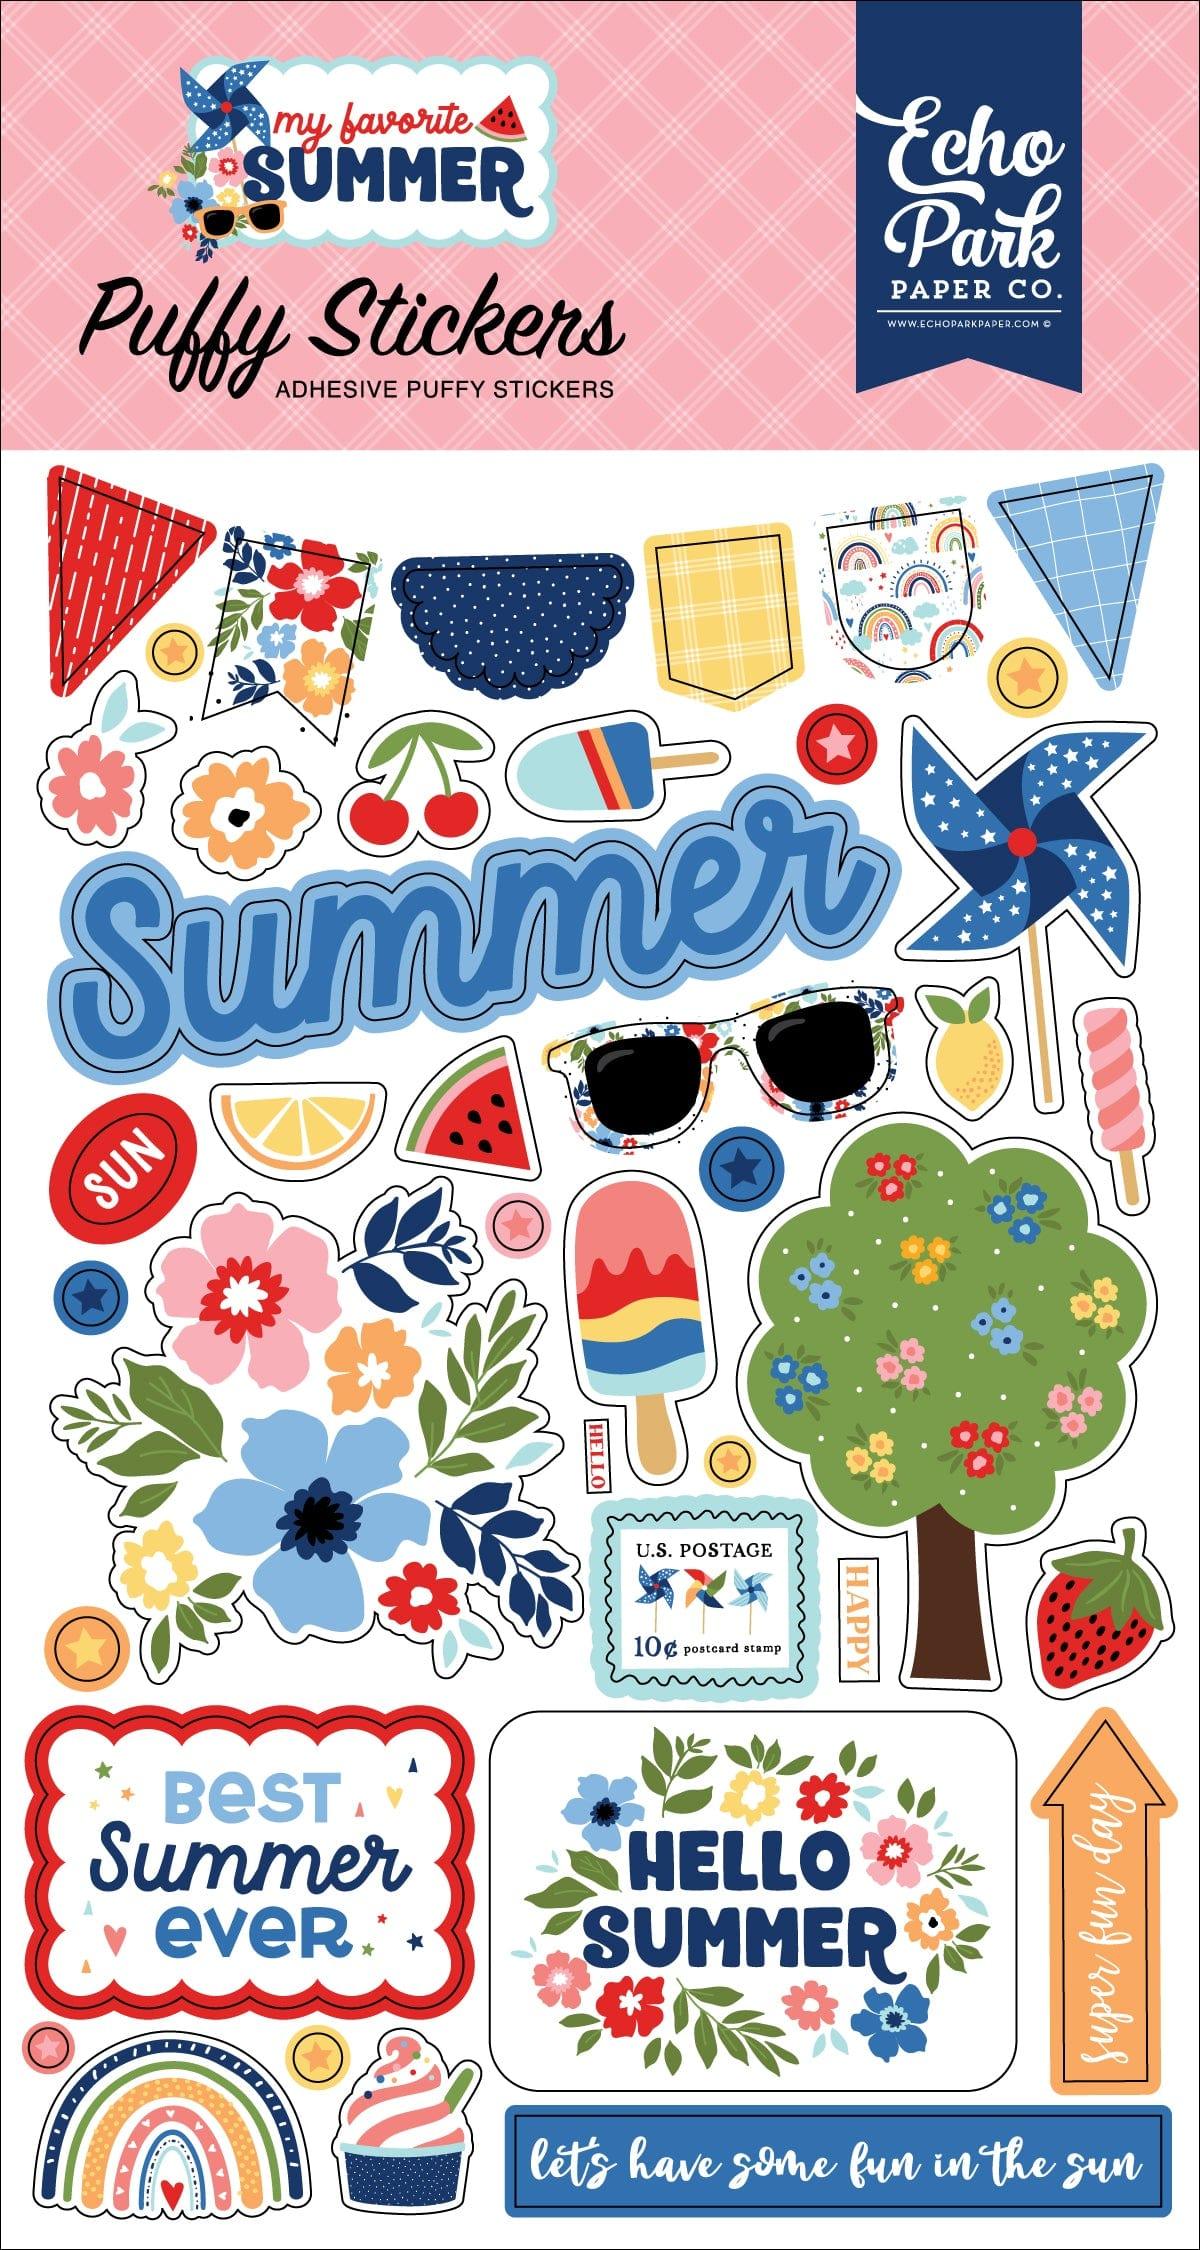 My Favorite Summer Collection 4 x 7 Puffy Stickers Scrapbook Embellishments by Echo Park Paper - Scrapbook Supply Companies